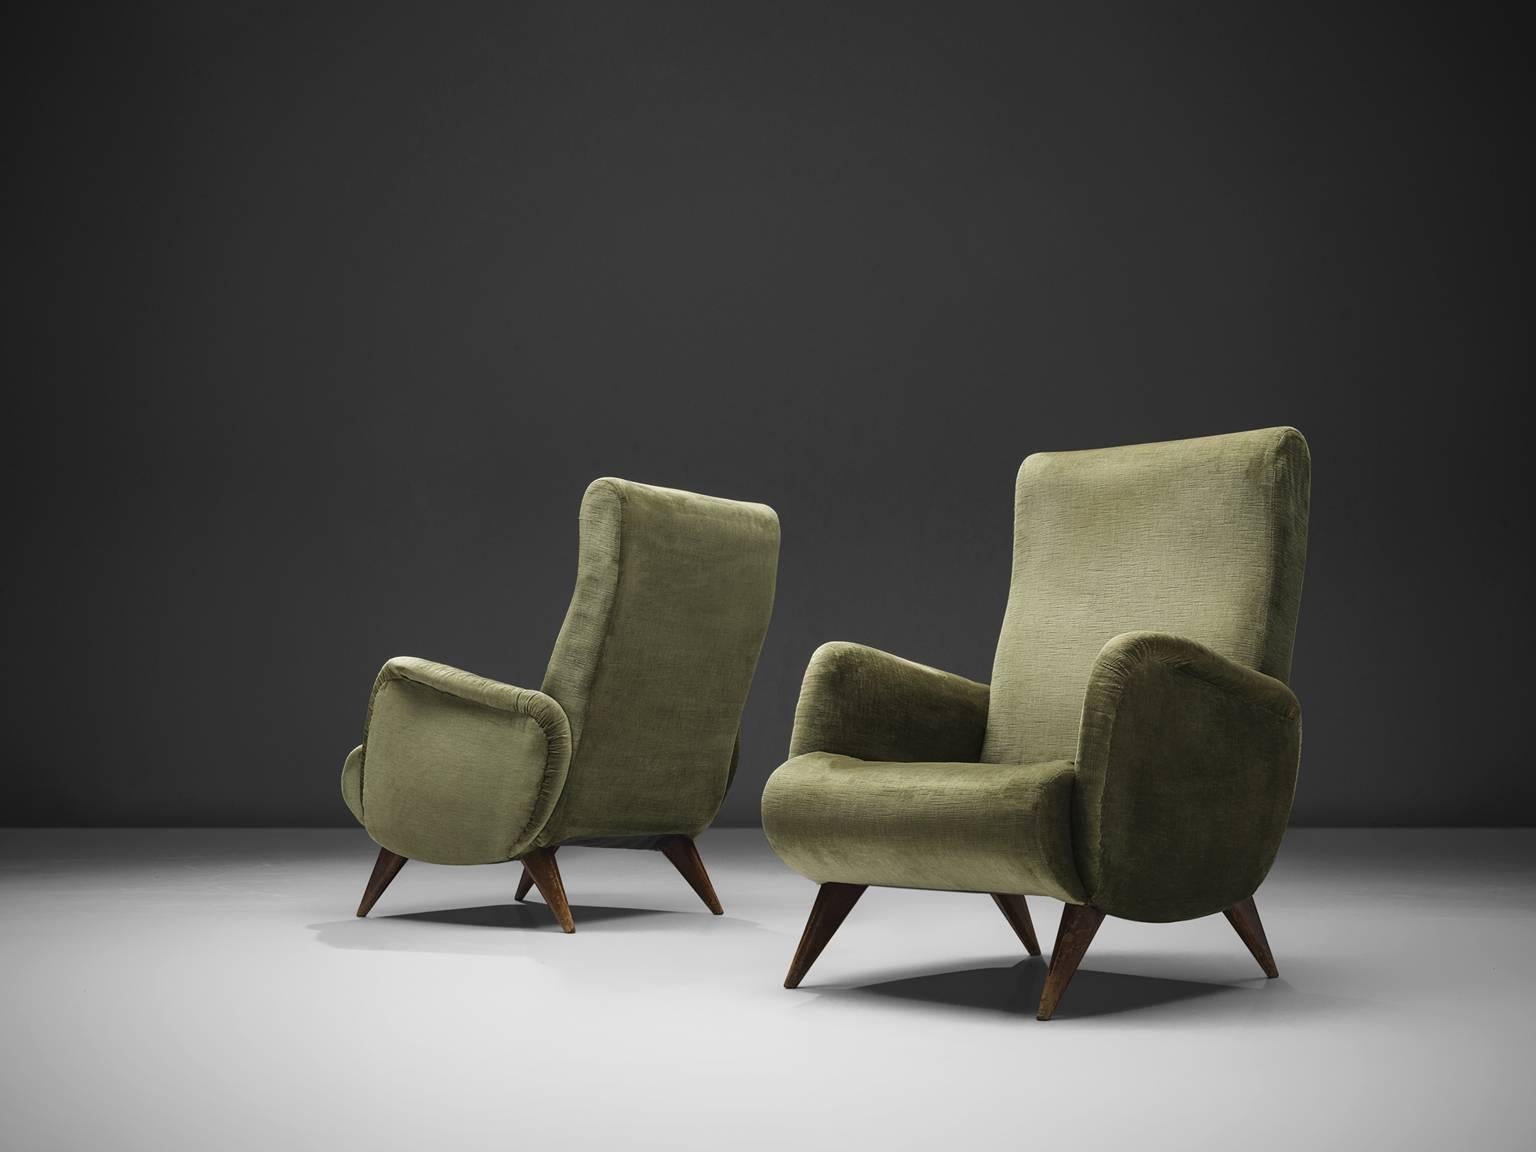 Easy chairs, green velvet, wood, Italy, 1950s

These easy chairs has thick armrests, full and rounded on the top. The sides are smooth and soft and the armrests rise slightly upwards. The feet are short and cylindrical and tapered towards the